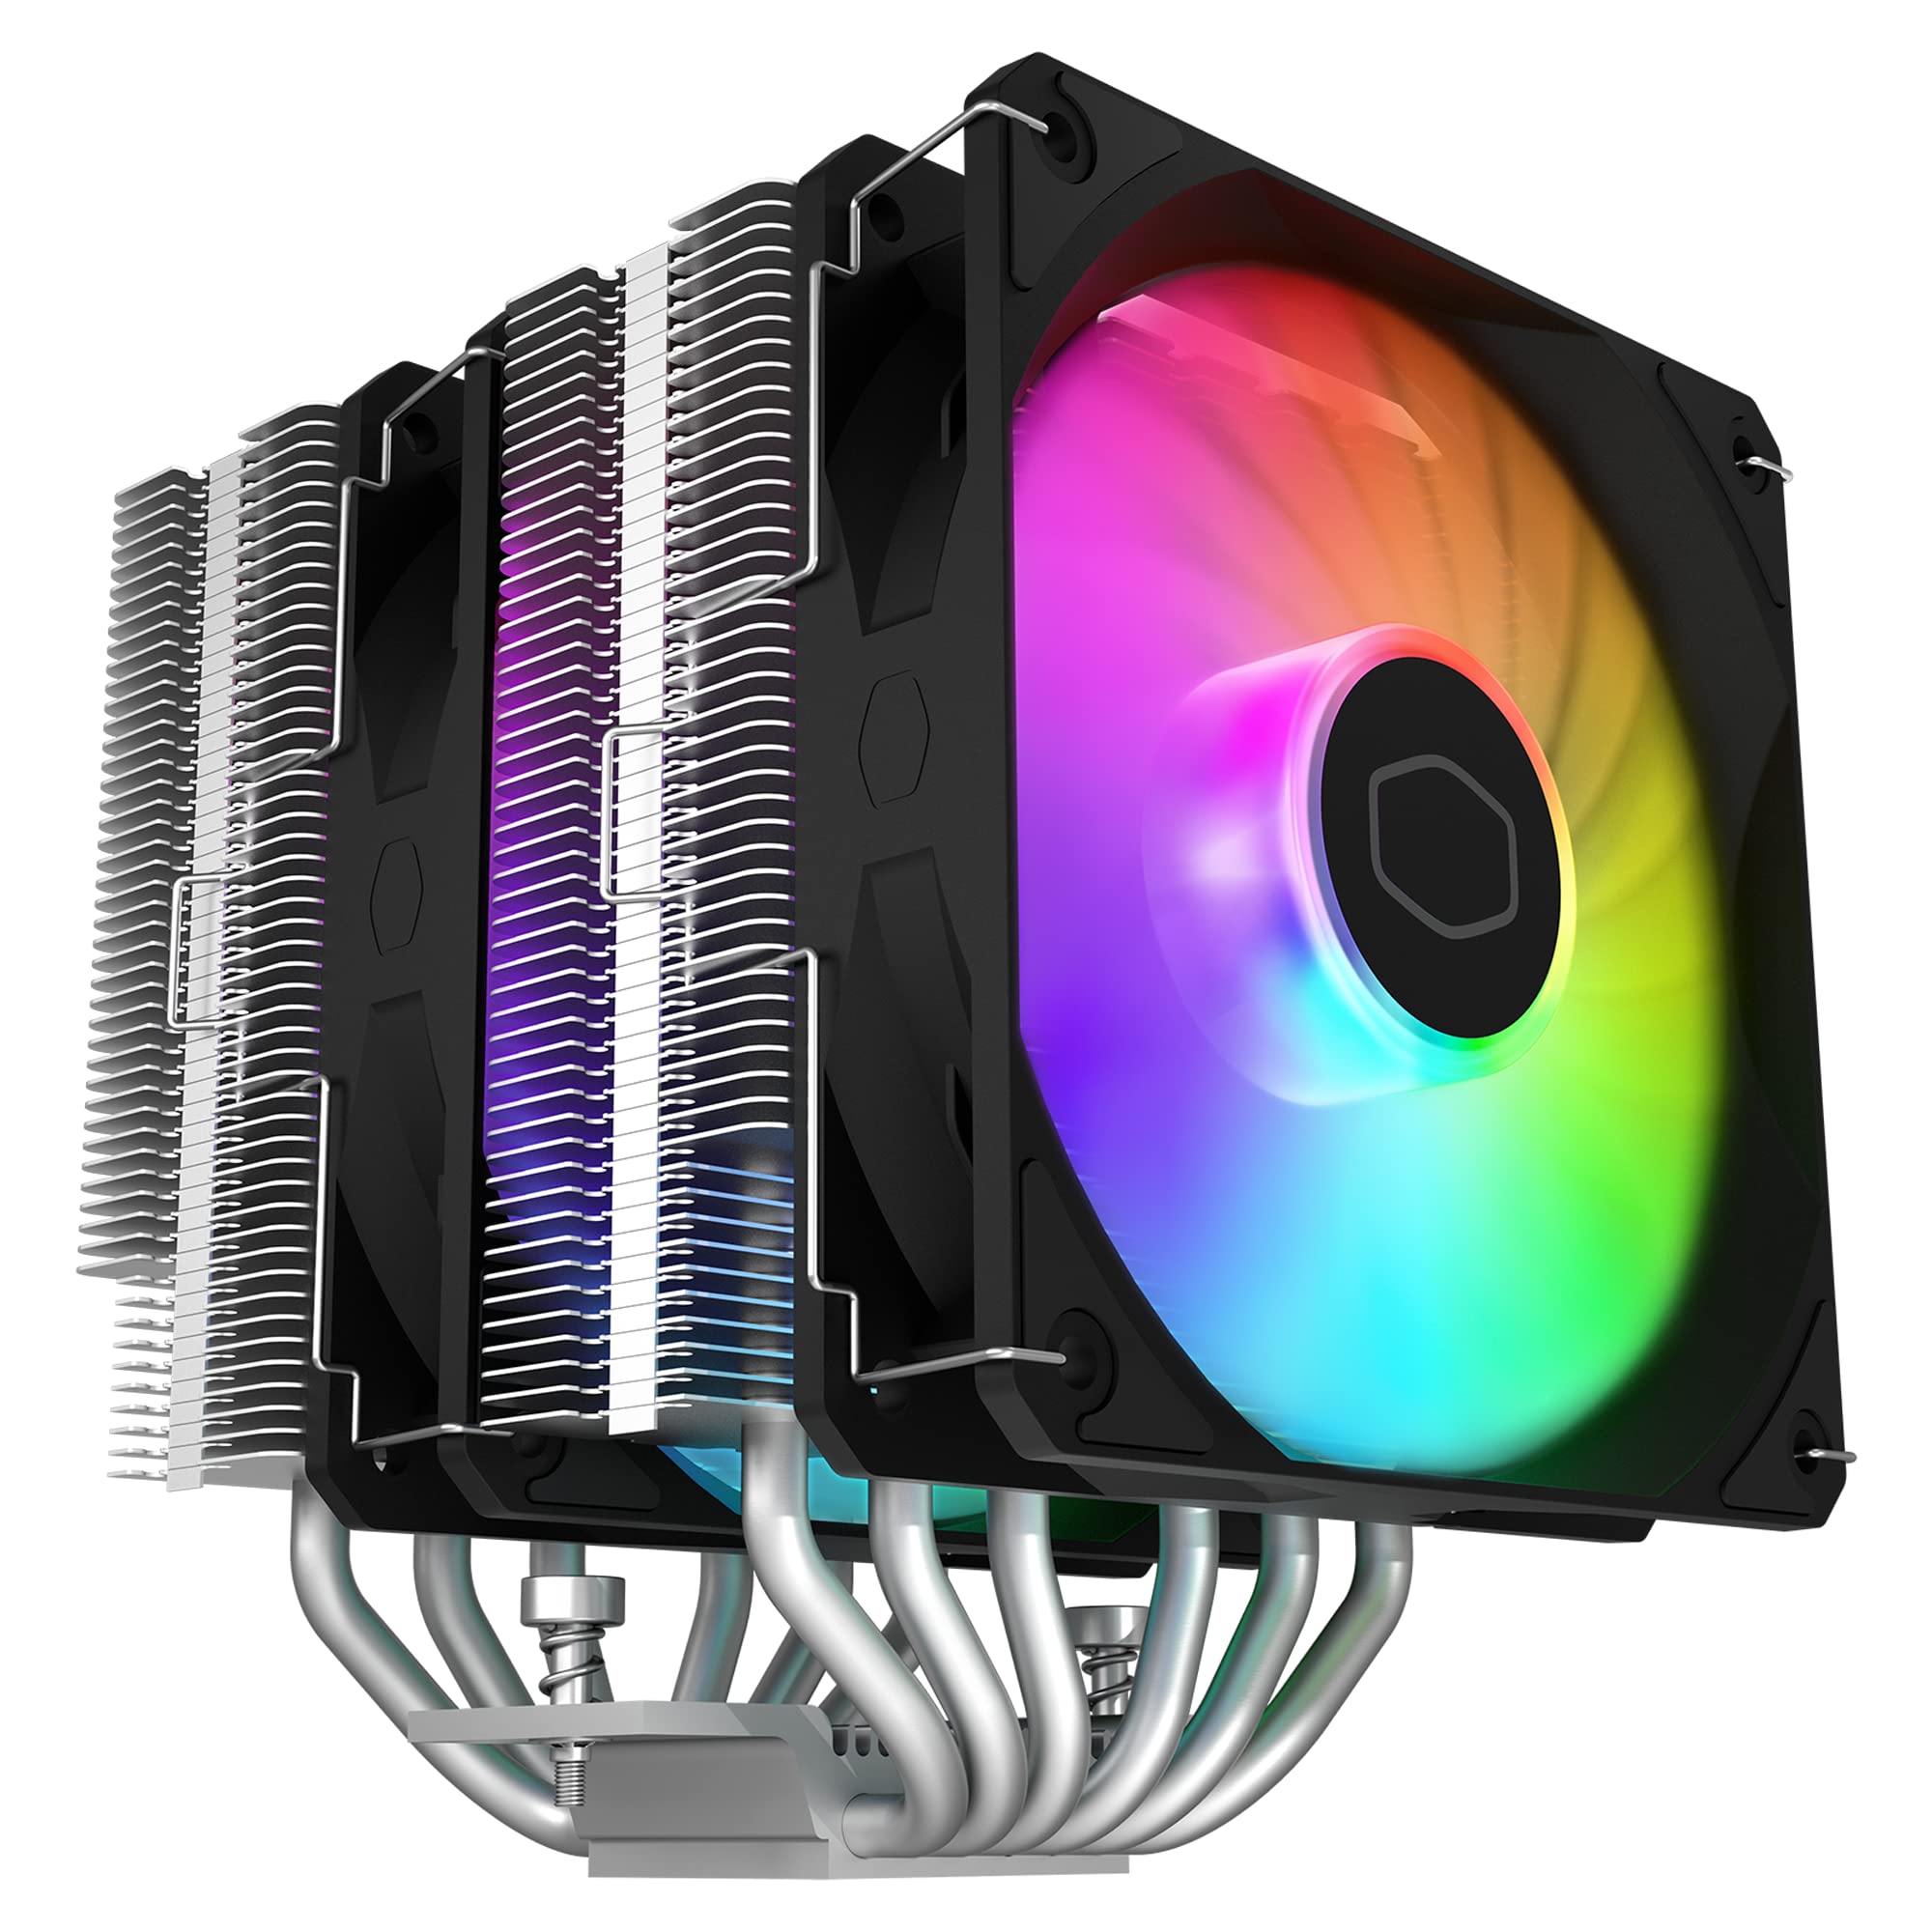 Cooler Master Hyper 620s Dual Tower ARGB 6 pipes 154.9mm tall Silver most Sockets $39.99